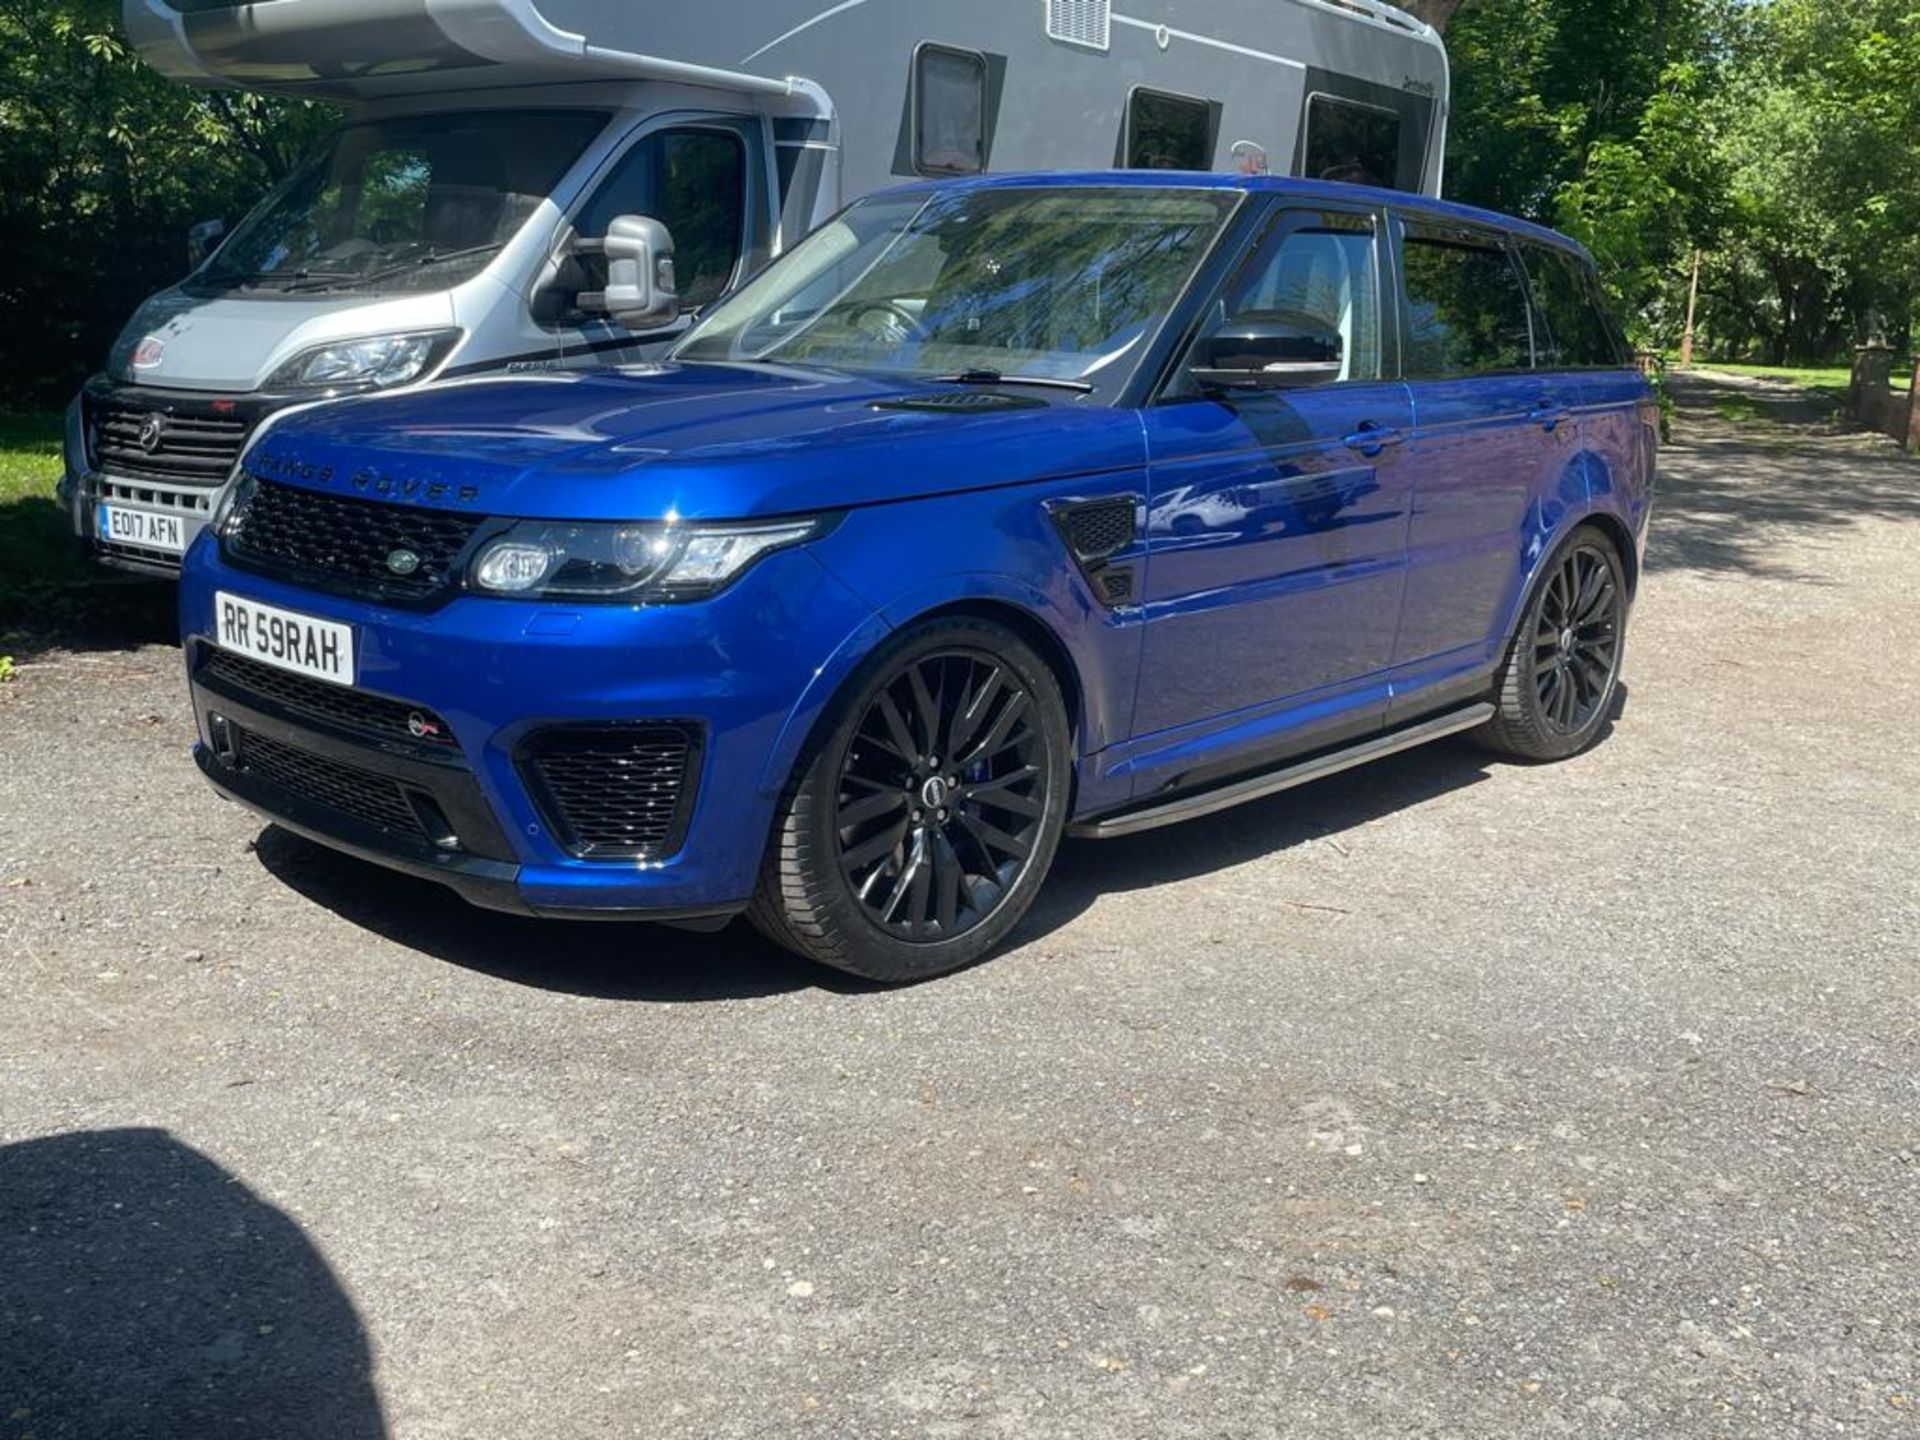 2016 RANGE ROVER SPORT SVR AUTOBIOGRAPHY DYNAMIC V8 SUPERCHARGED AUTOMATIC 5.0 550PS PETROL ENGINE - Image 13 of 28